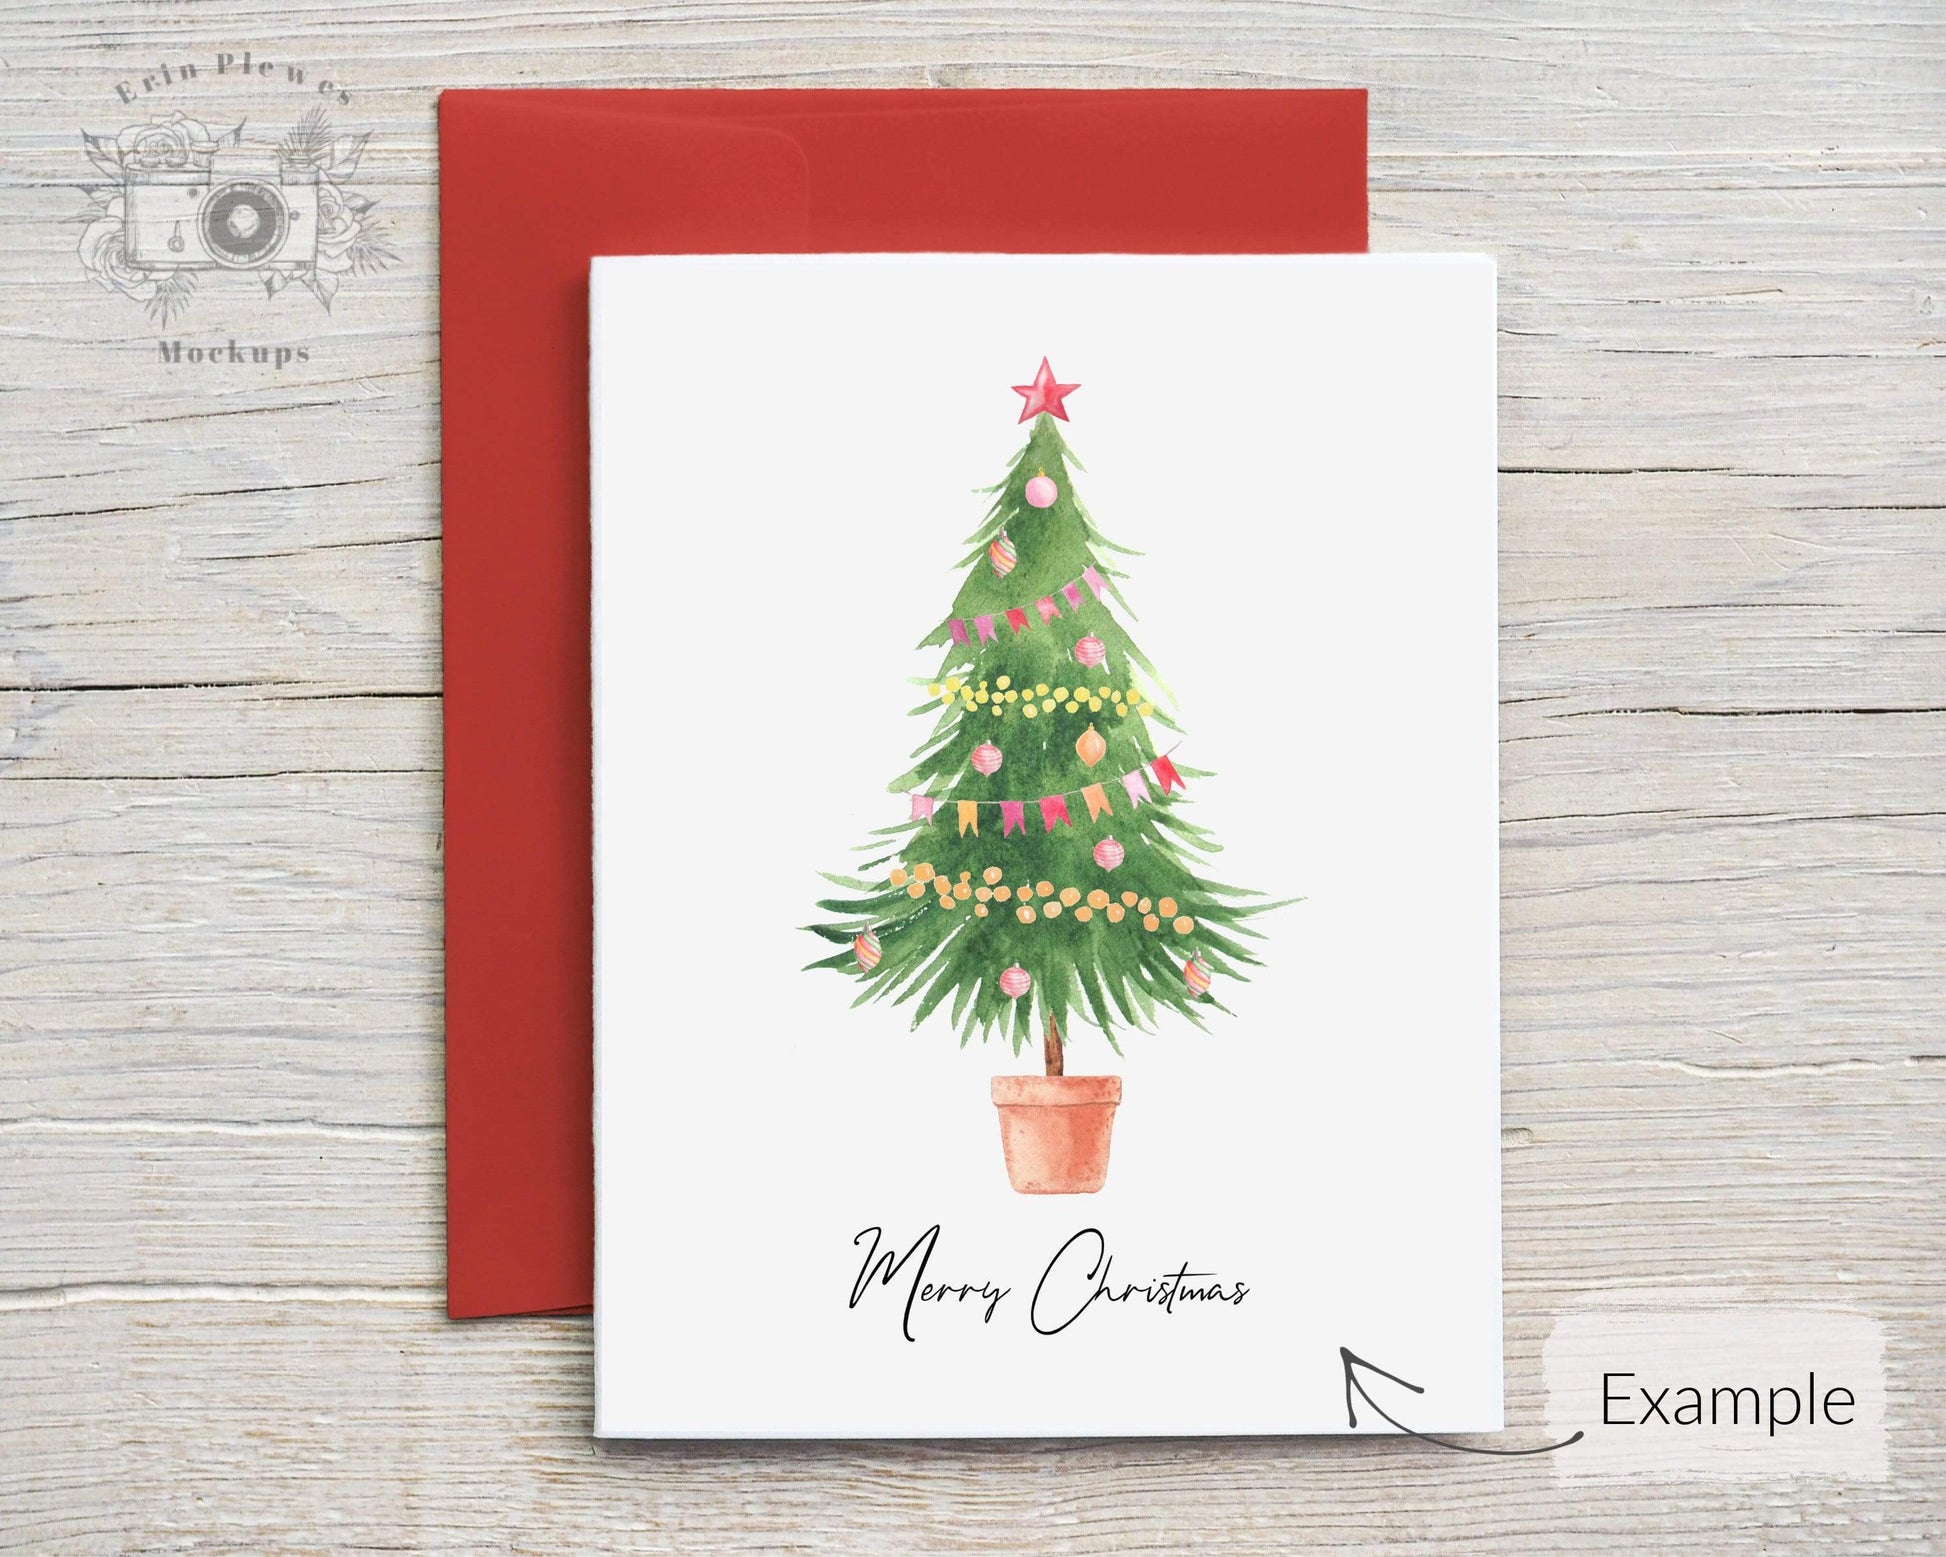 Erin Plewes Mockups A2 Greeting card mockup with red envelope, Thank you card mock-up for rustic Christmas and lifestyle photo, Jpeg Instant Digital Download